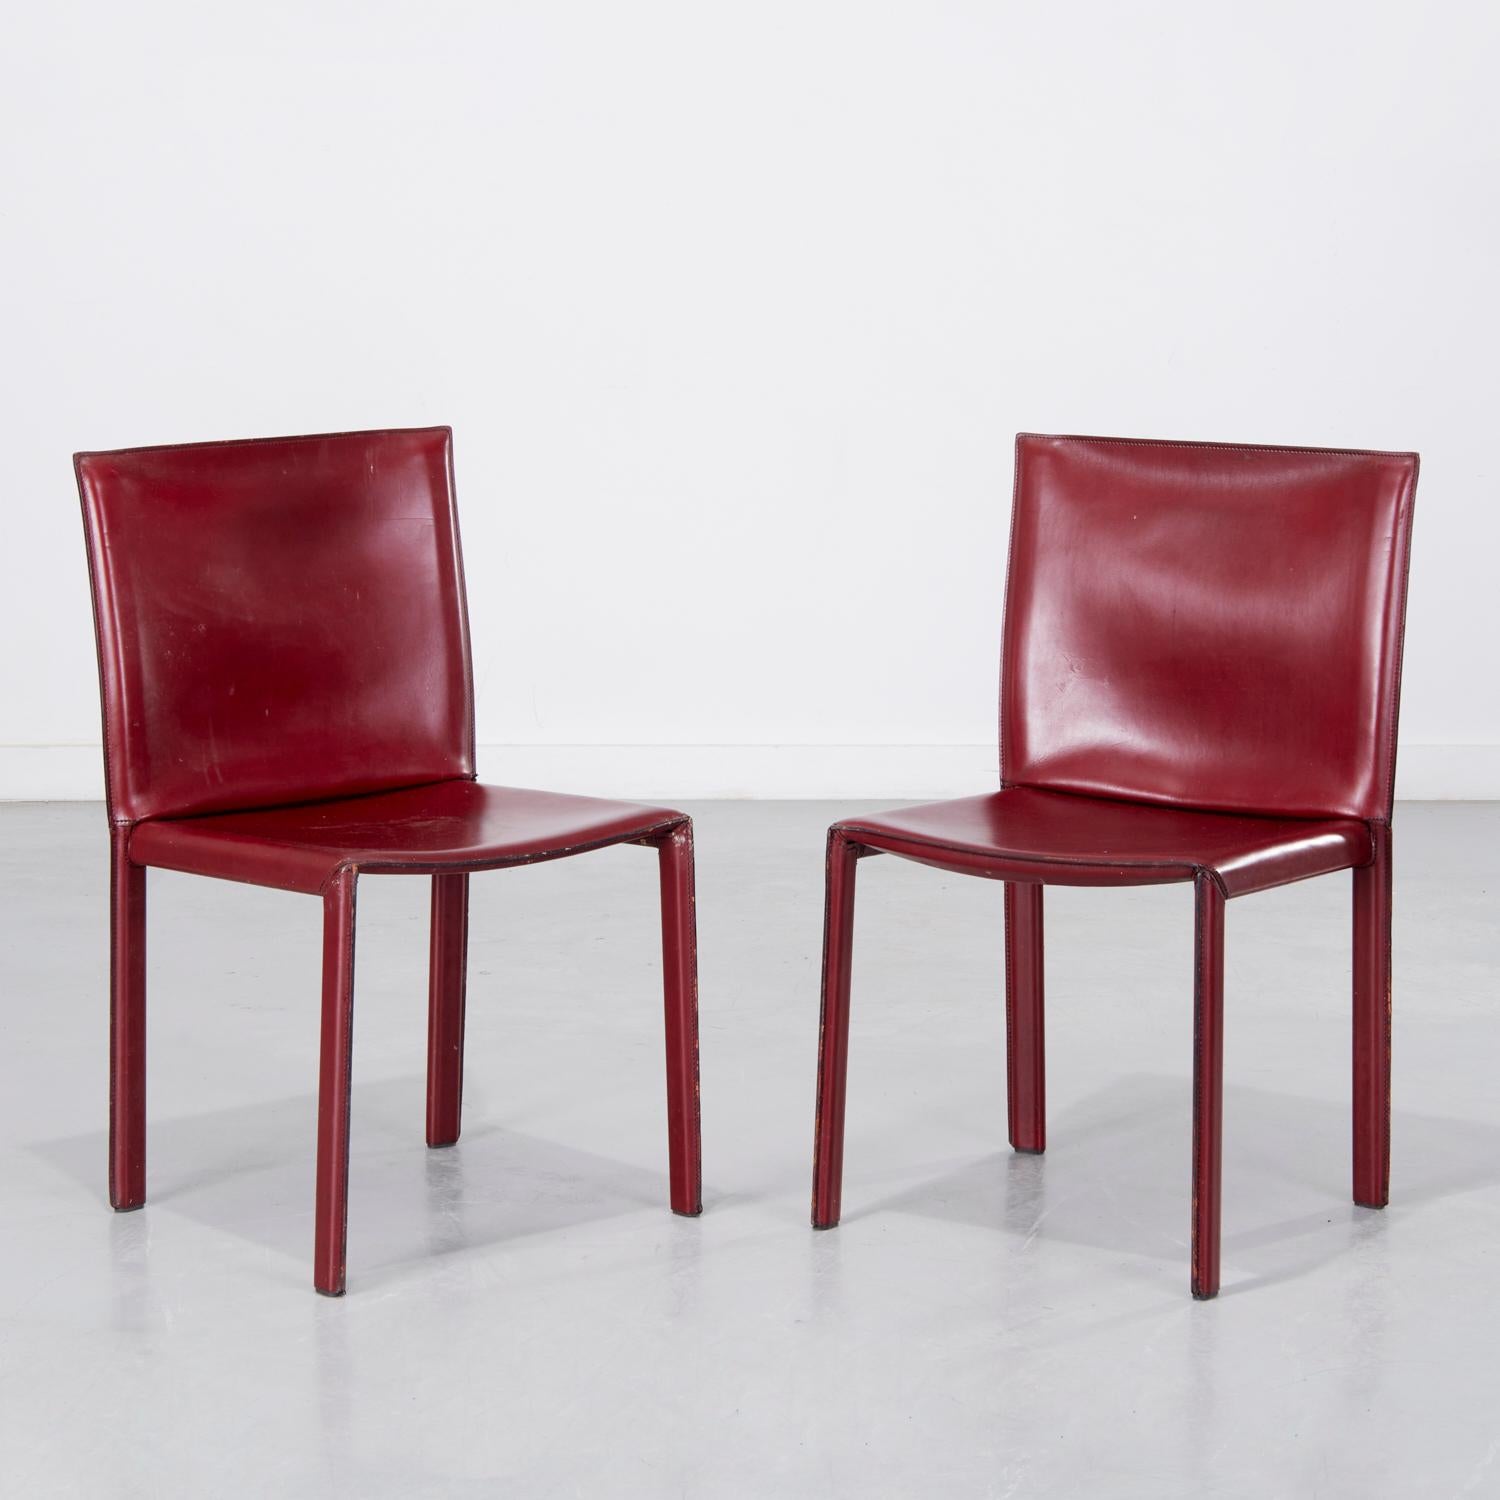 Vintage Enrico Pellizzoni,  Leather 'Pasqualina' Side Chairs - A Pair For Sale 1